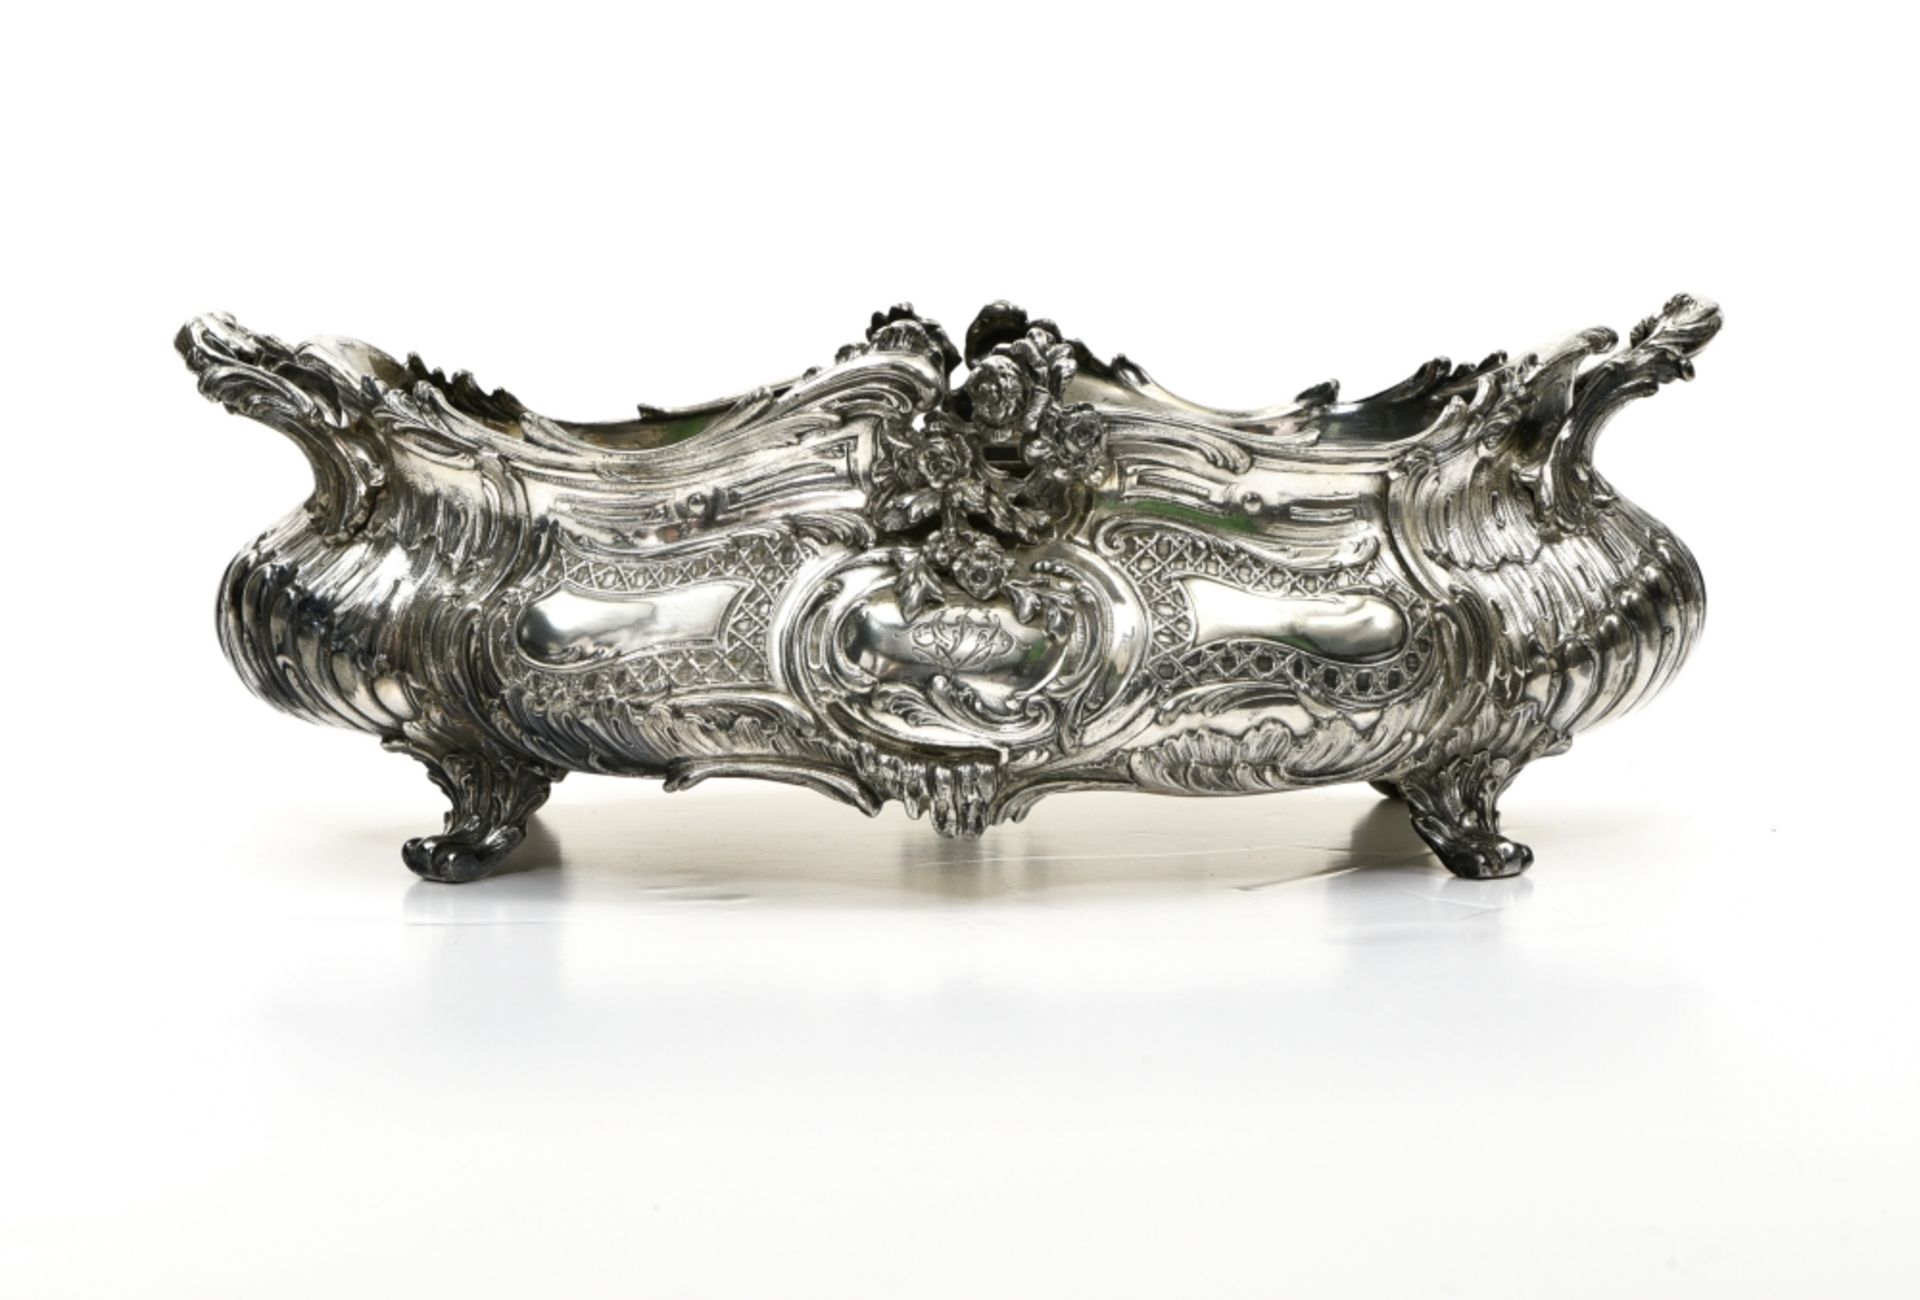 Victor SAGLIER Rocaille planter Silver-plated bronze with numbered cartridge and its silver-plated